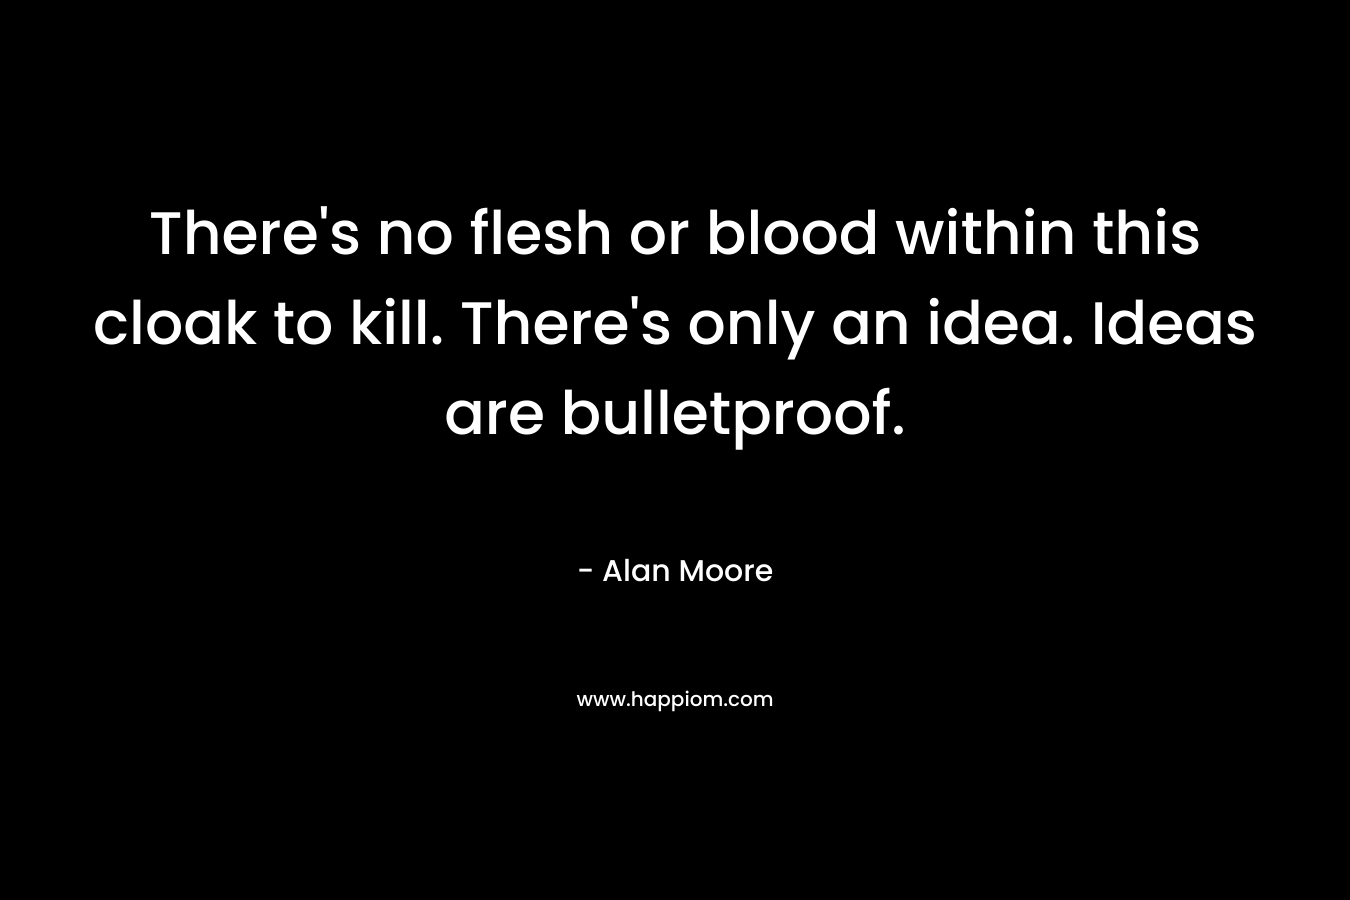 There’s no flesh or blood within this cloak to kill. There’s only an idea. Ideas are bulletproof. – Alan Moore